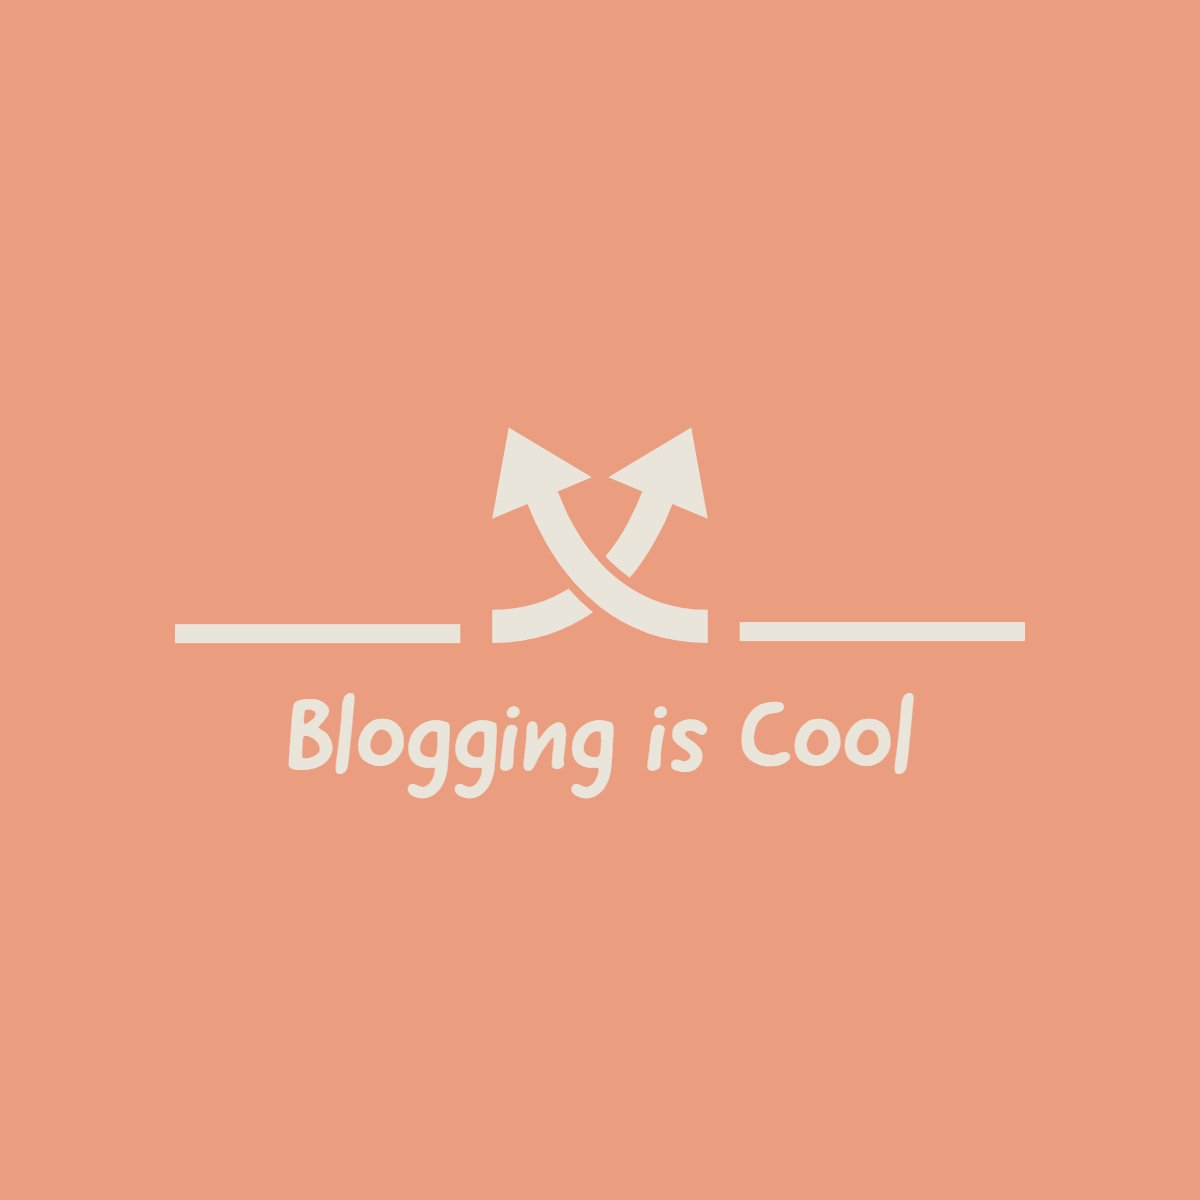 bloggingiscool.com is a blog about teaching bloggers to get better at blogging